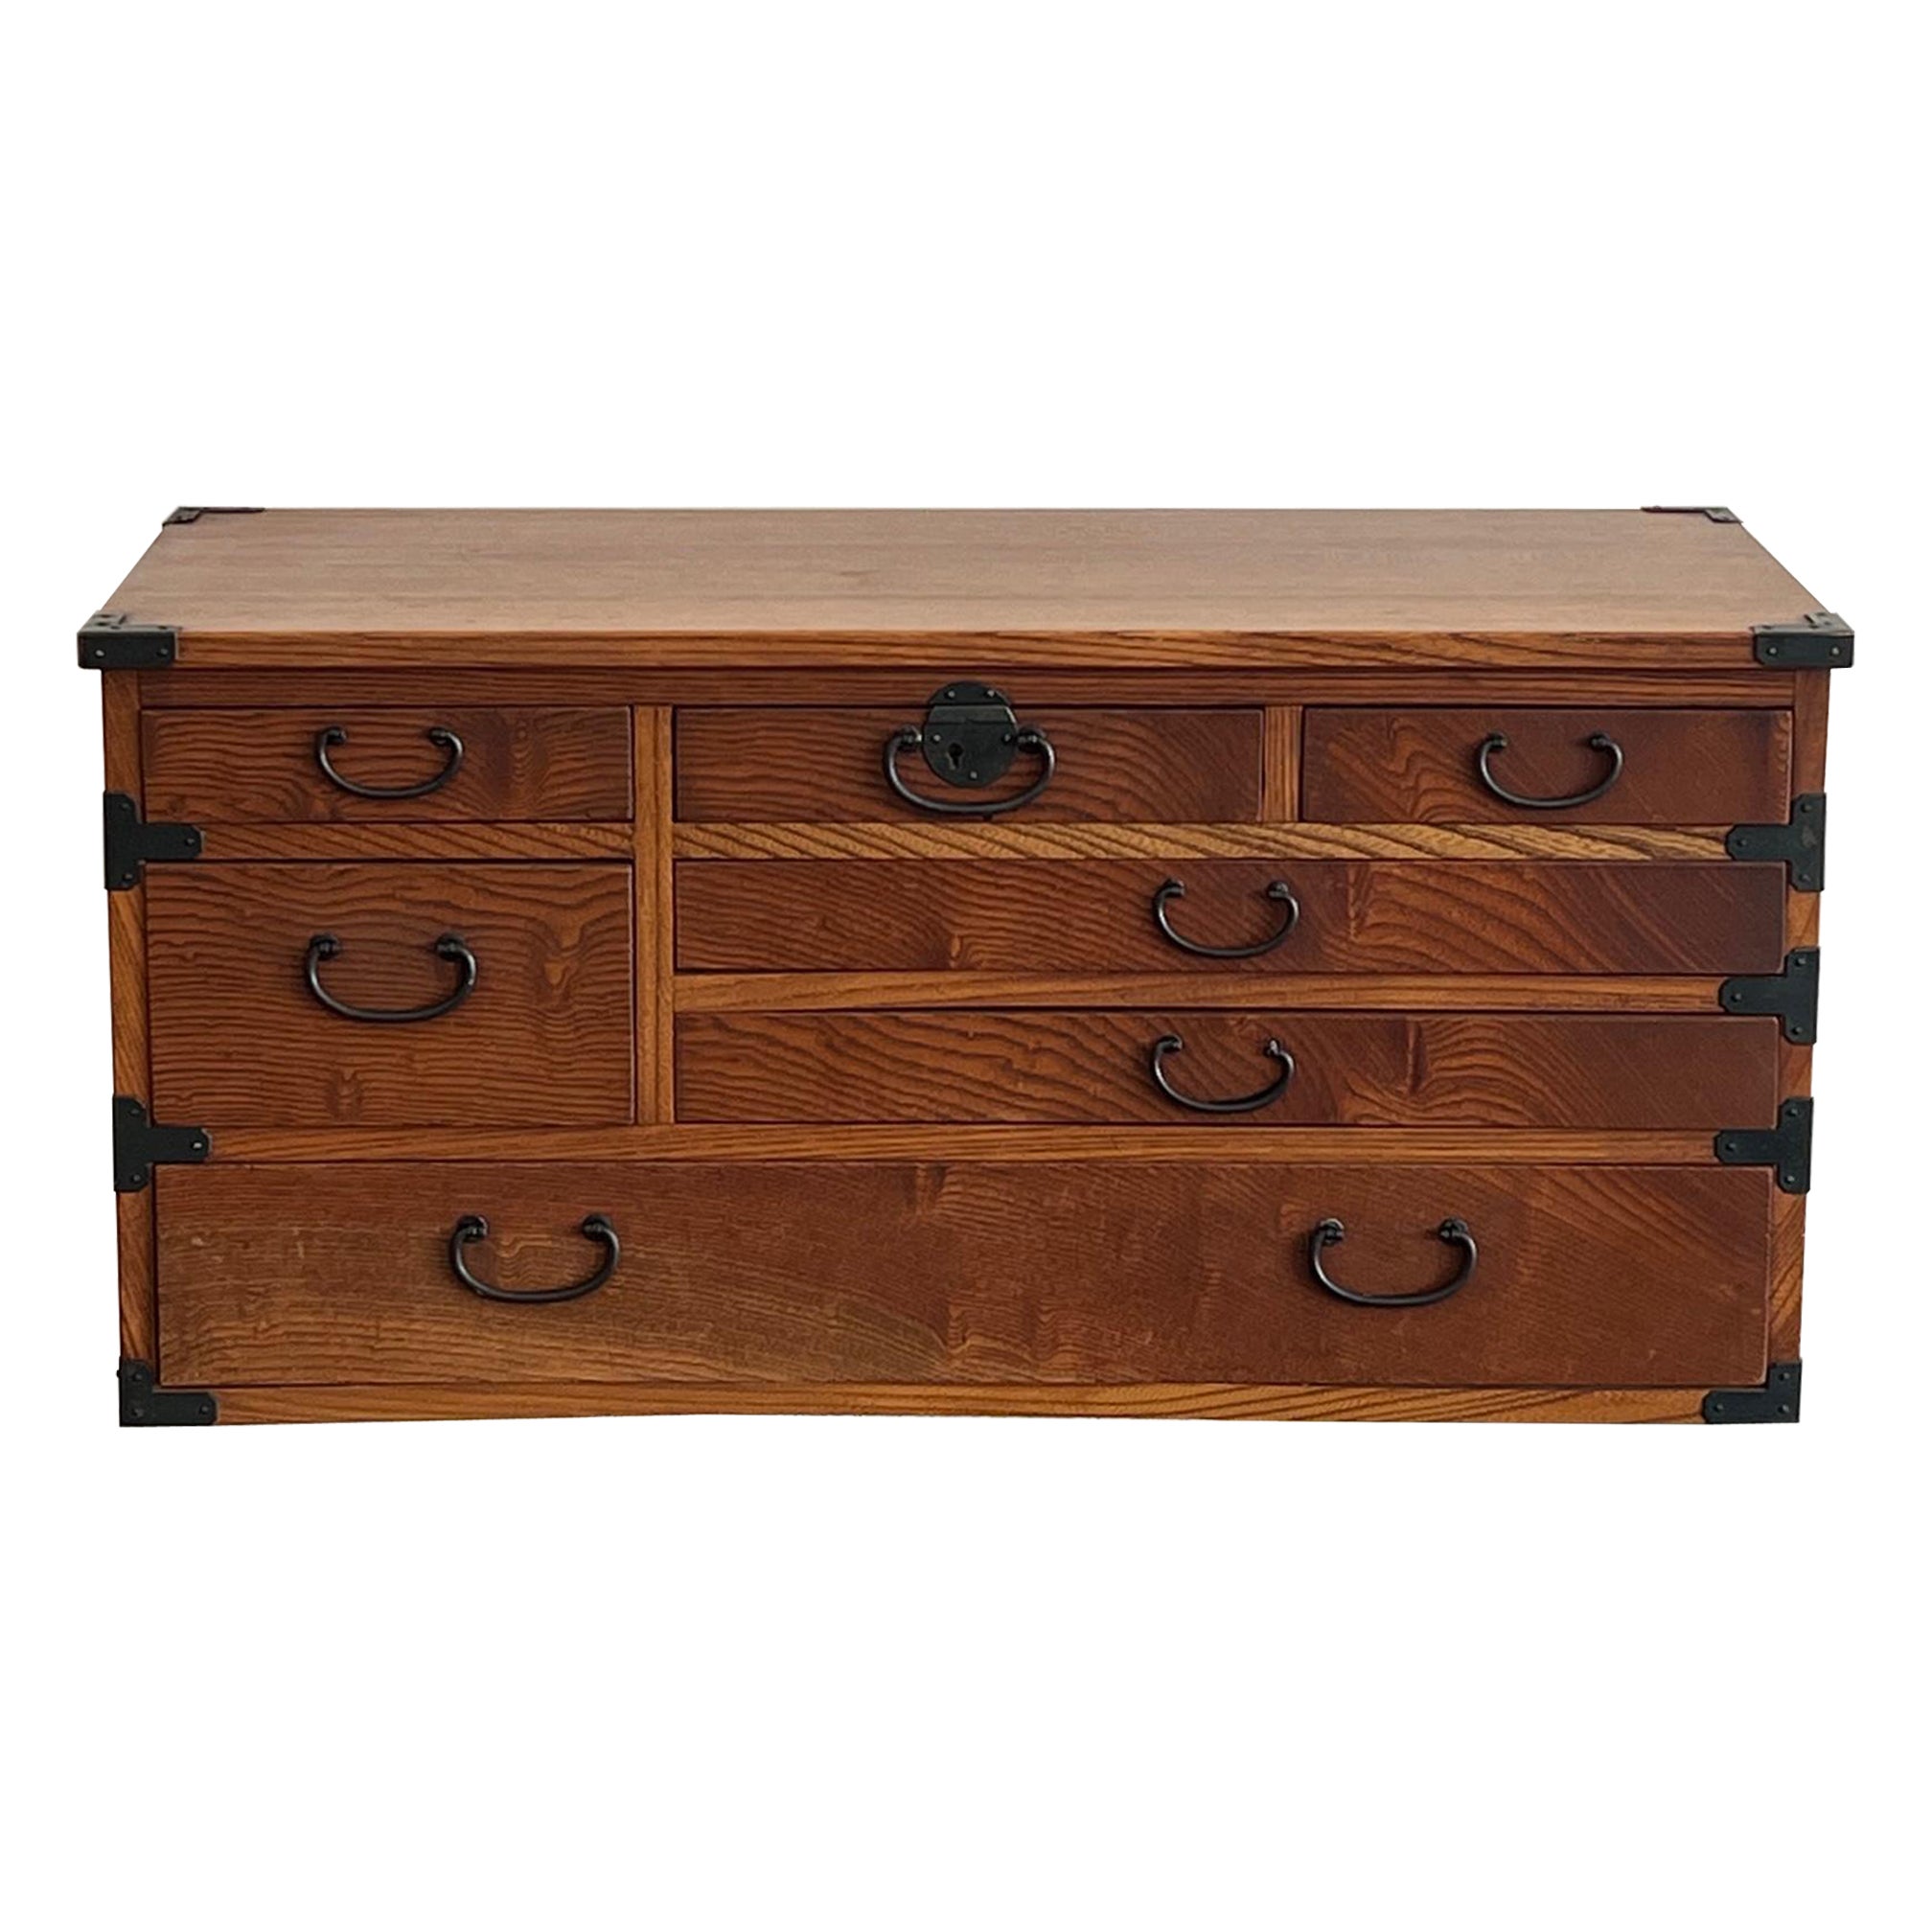 Japanese Tansu Jewelry Chest For Sale